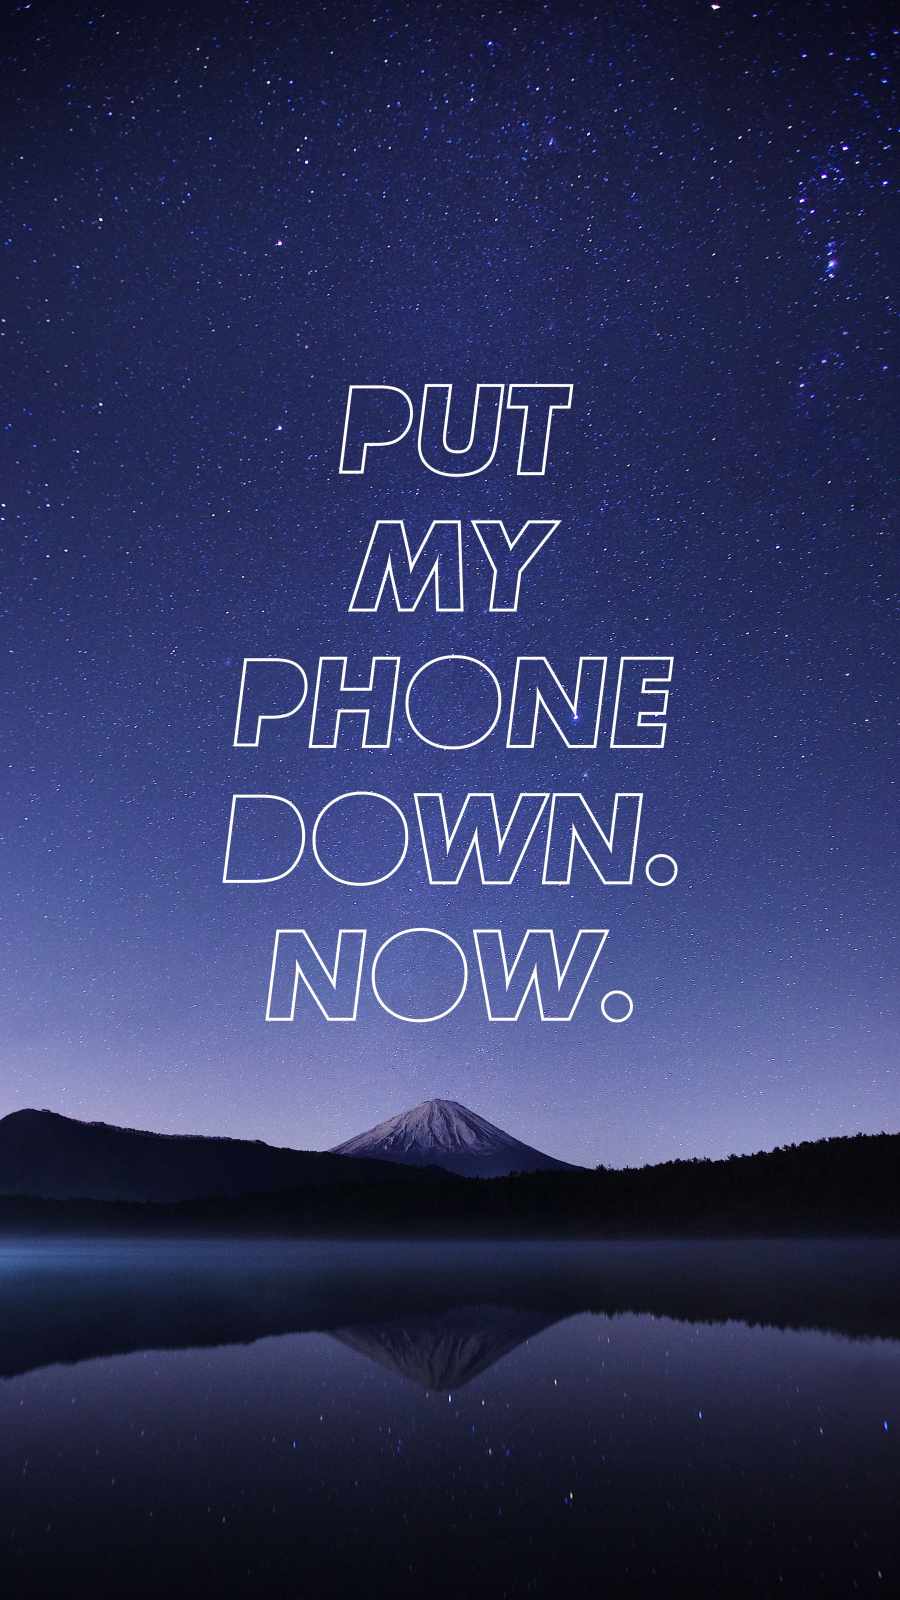 Put The Phone Down Wallpapers